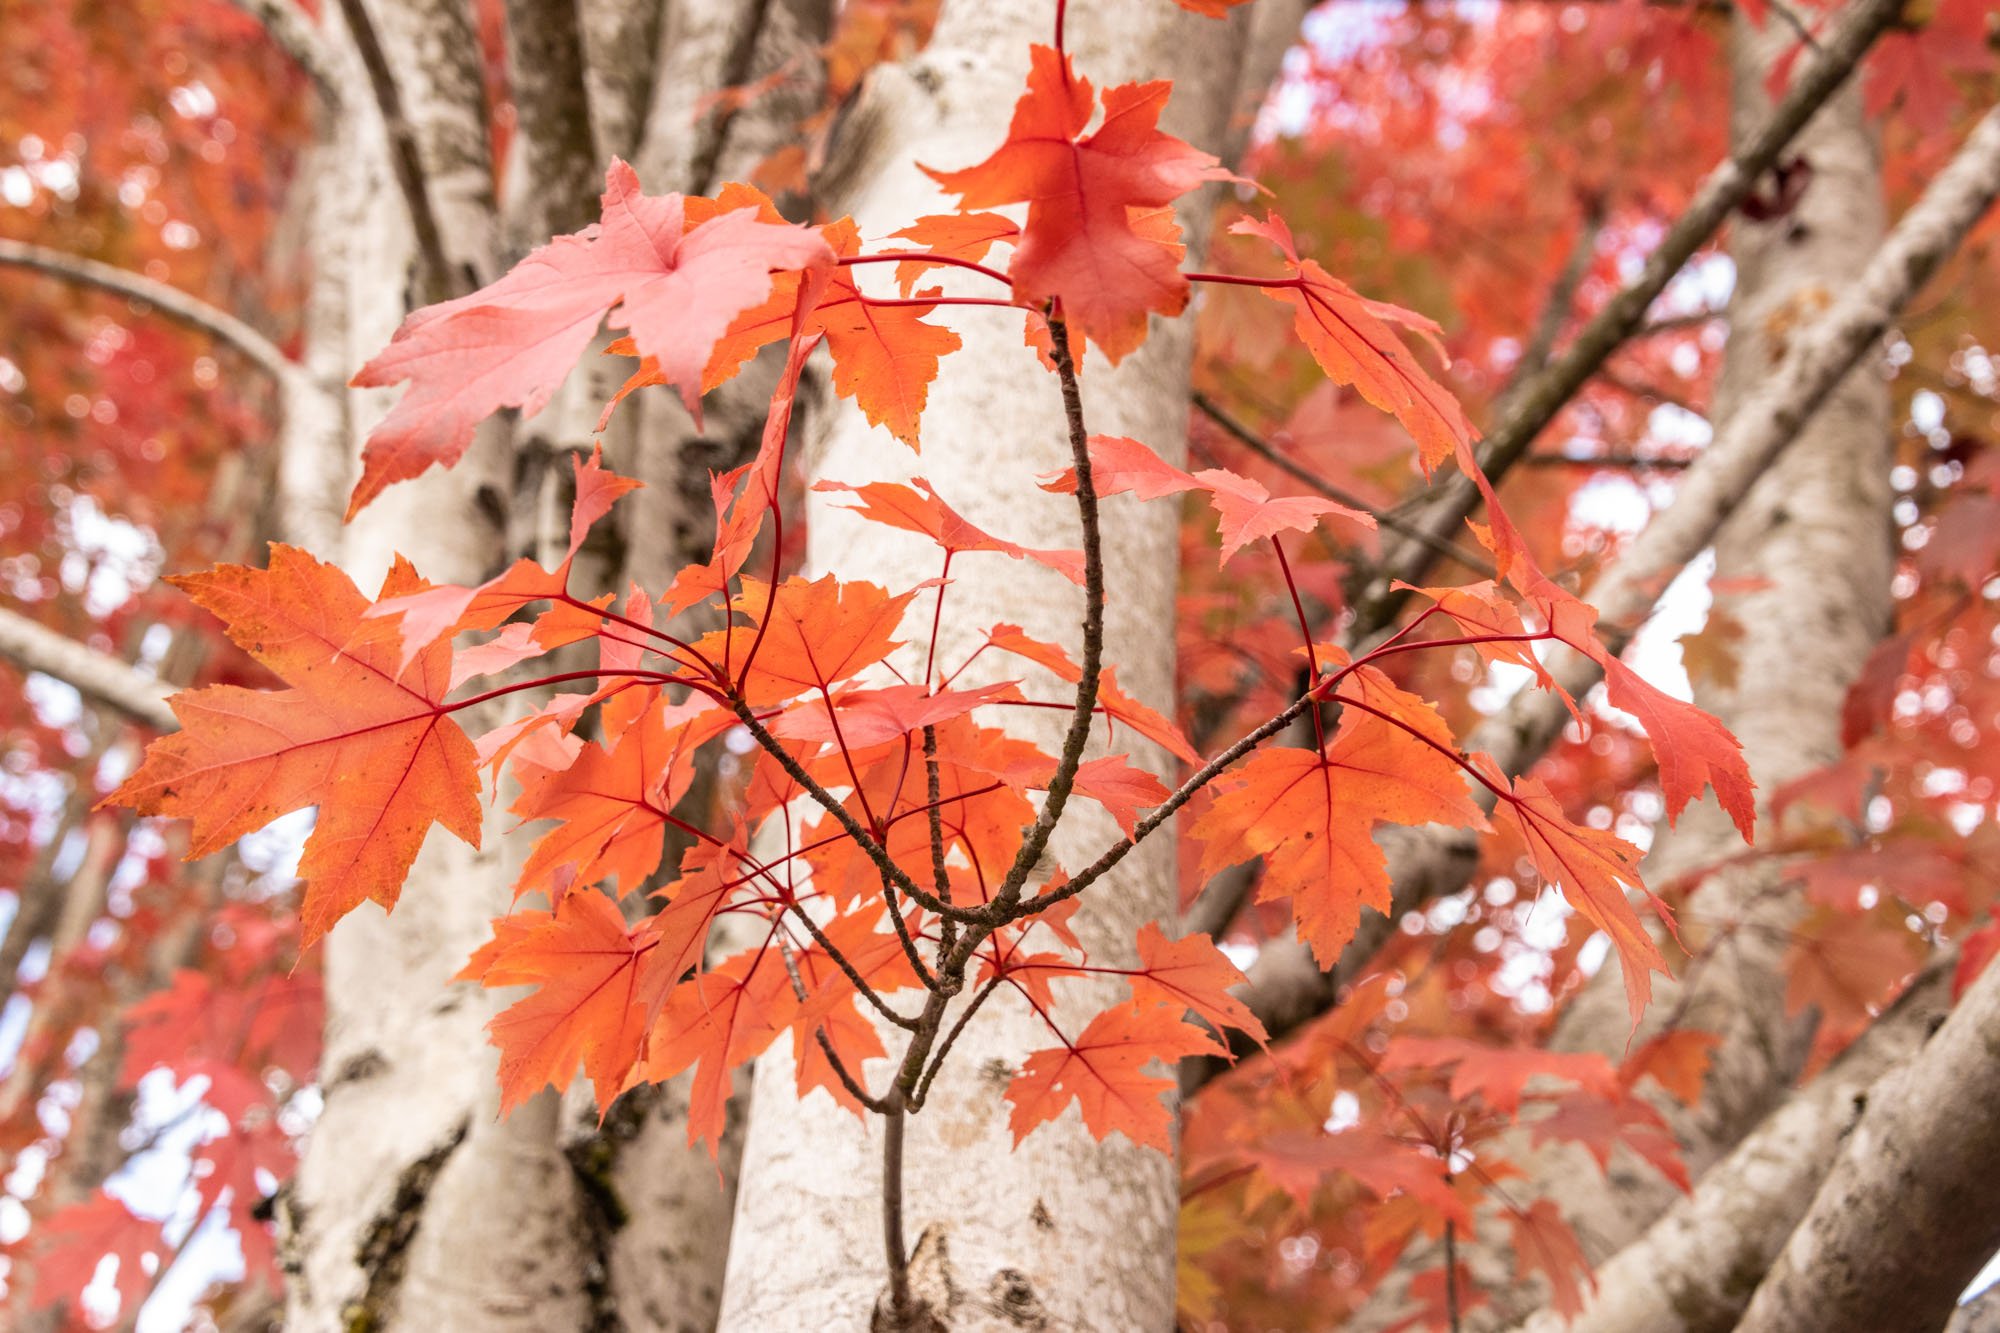 small amount just red leaves on branch.jpg